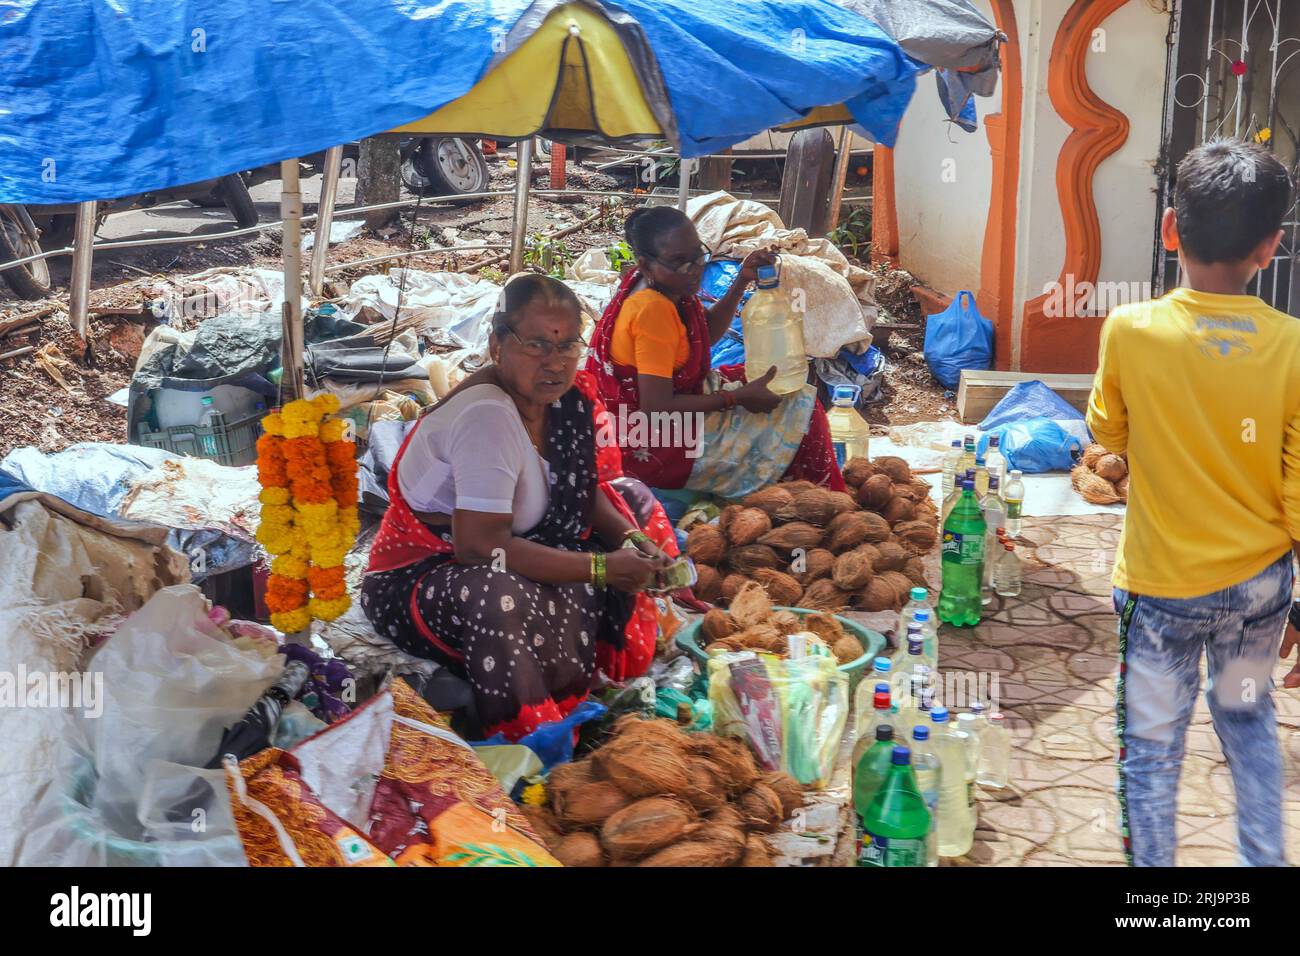 Margao, South Goa, India. 22nd Aug, 2023. Cocunuts for sale in the Narrow passage ways selling anything imaginable in the busy and colourful market at the city of Margao, South India.Paul Quezada-Neiman/Alamy Live News Credit: Paul Quezada-Neiman/Alamy Live News Stock Photo